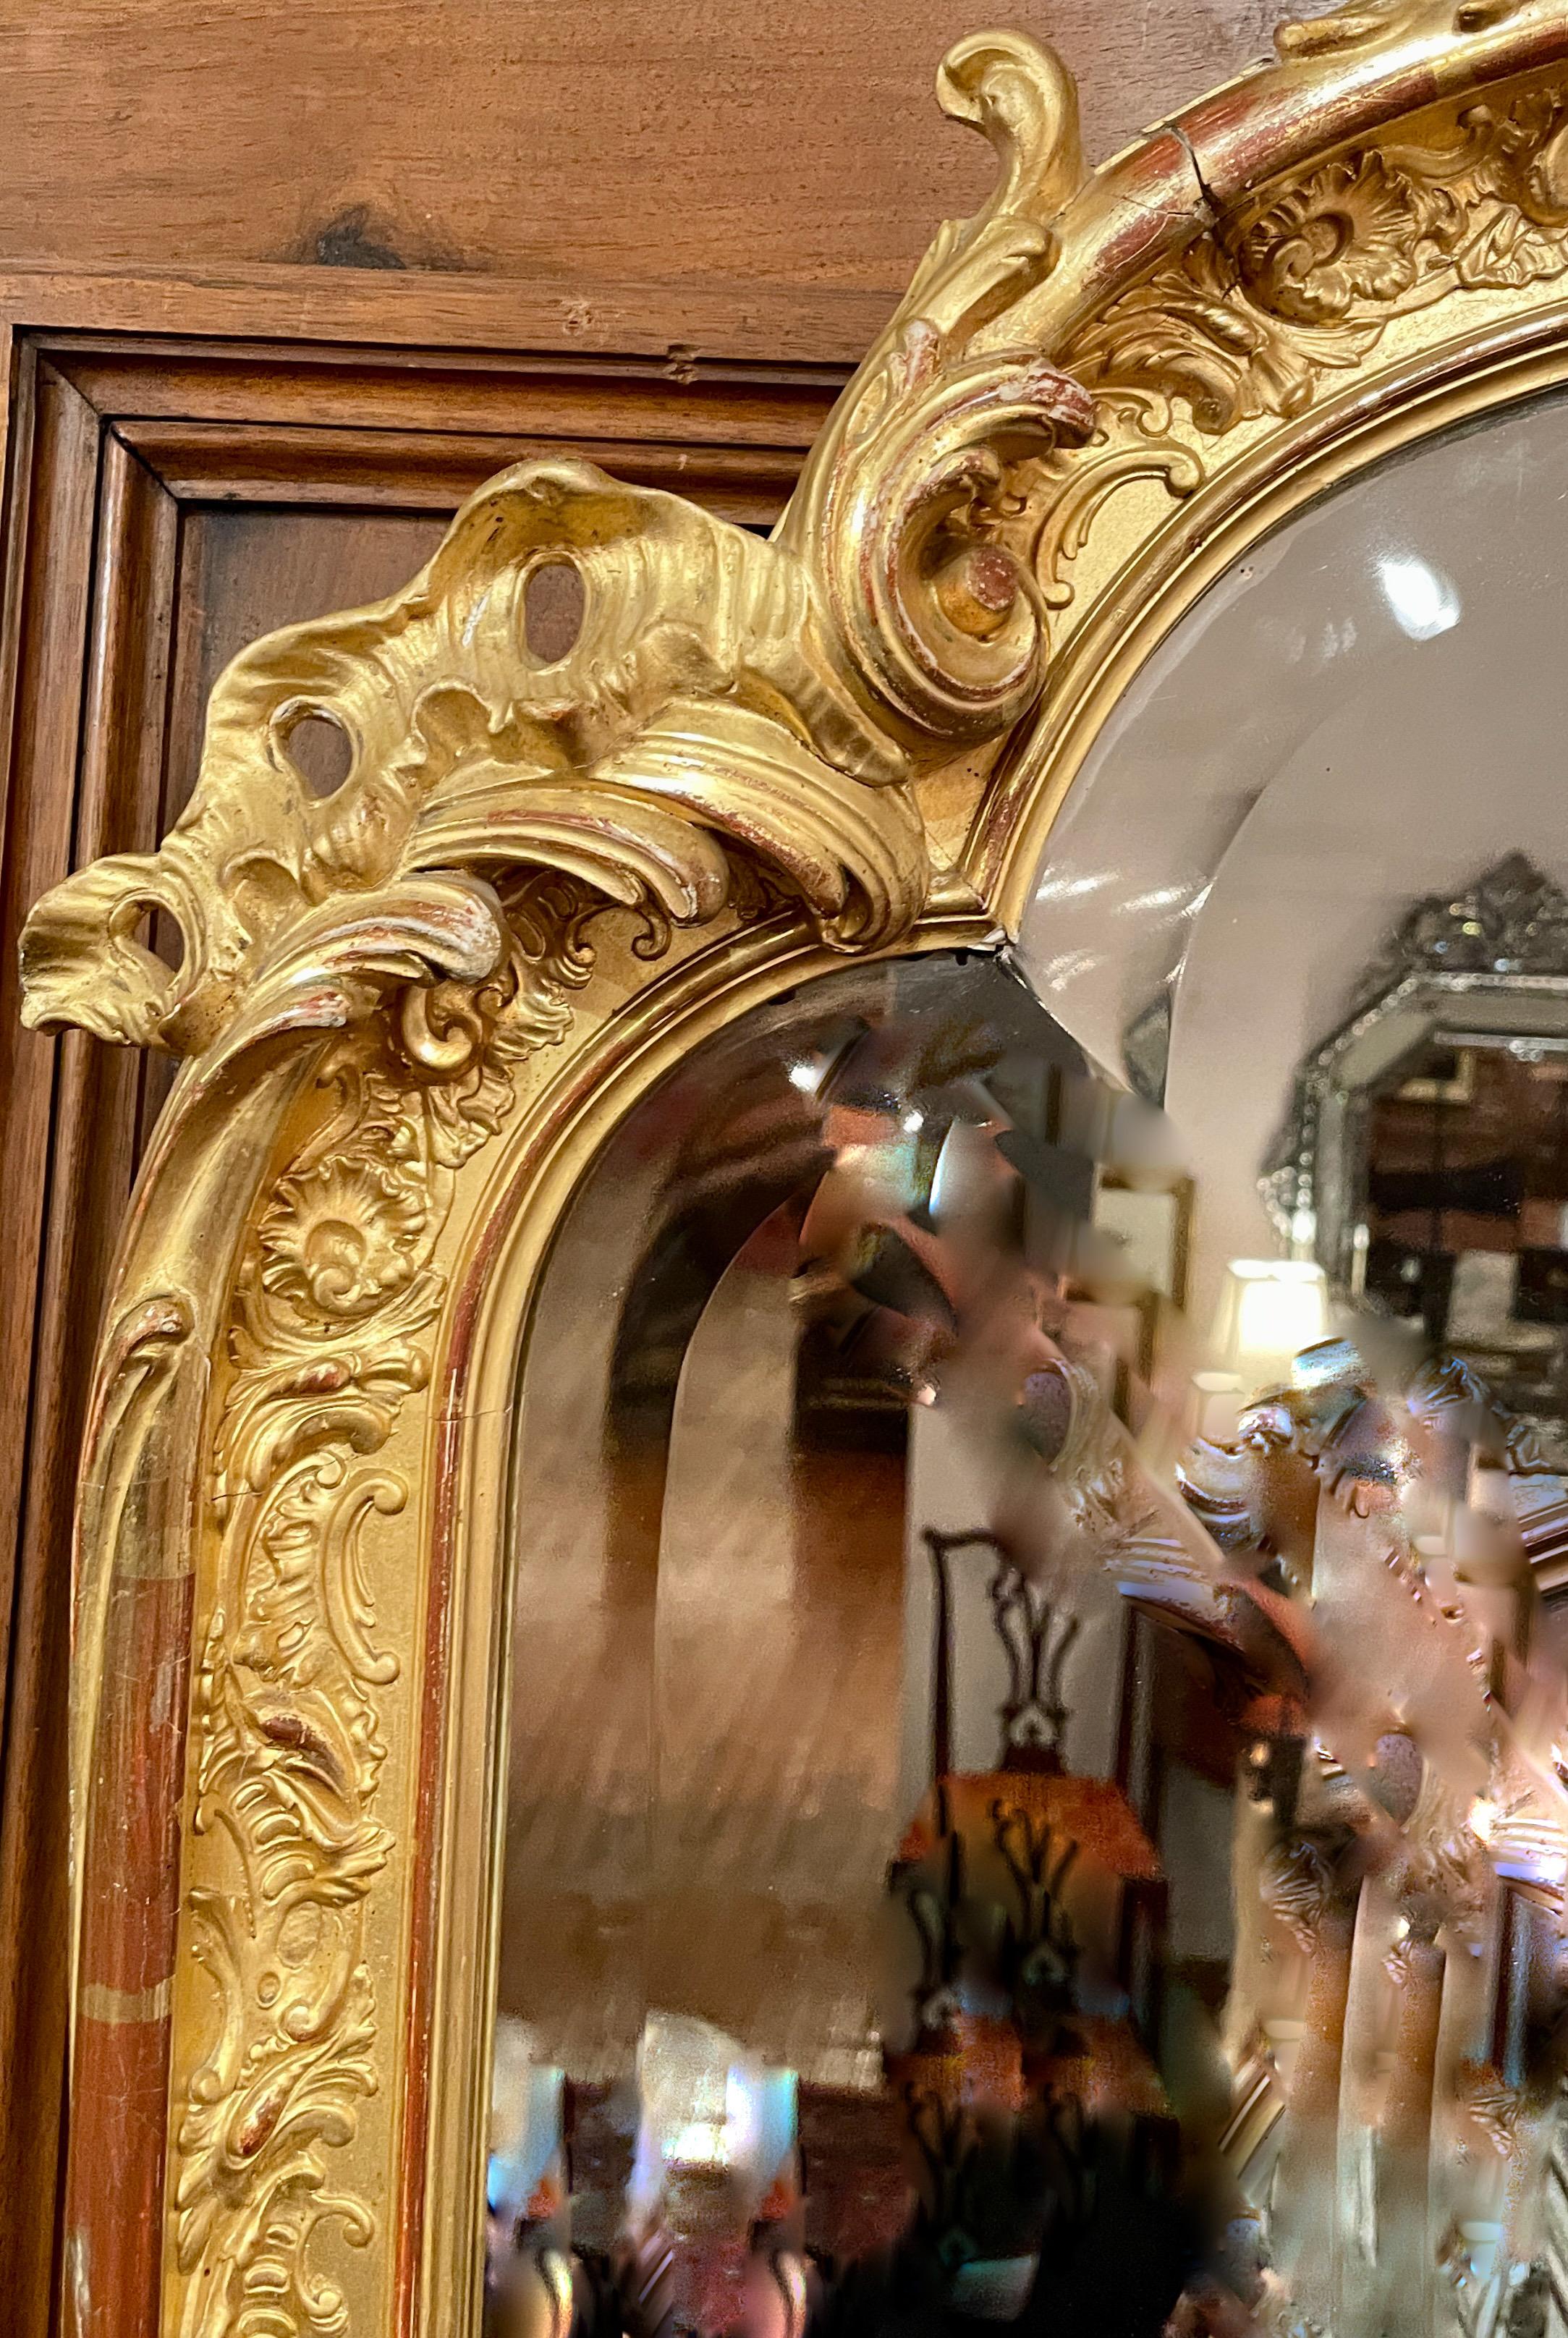 Antique French Napoleon III Gold Leaf Mirror with Beveling, Circa 1875-1885 In Good Condition For Sale In New Orleans, LA